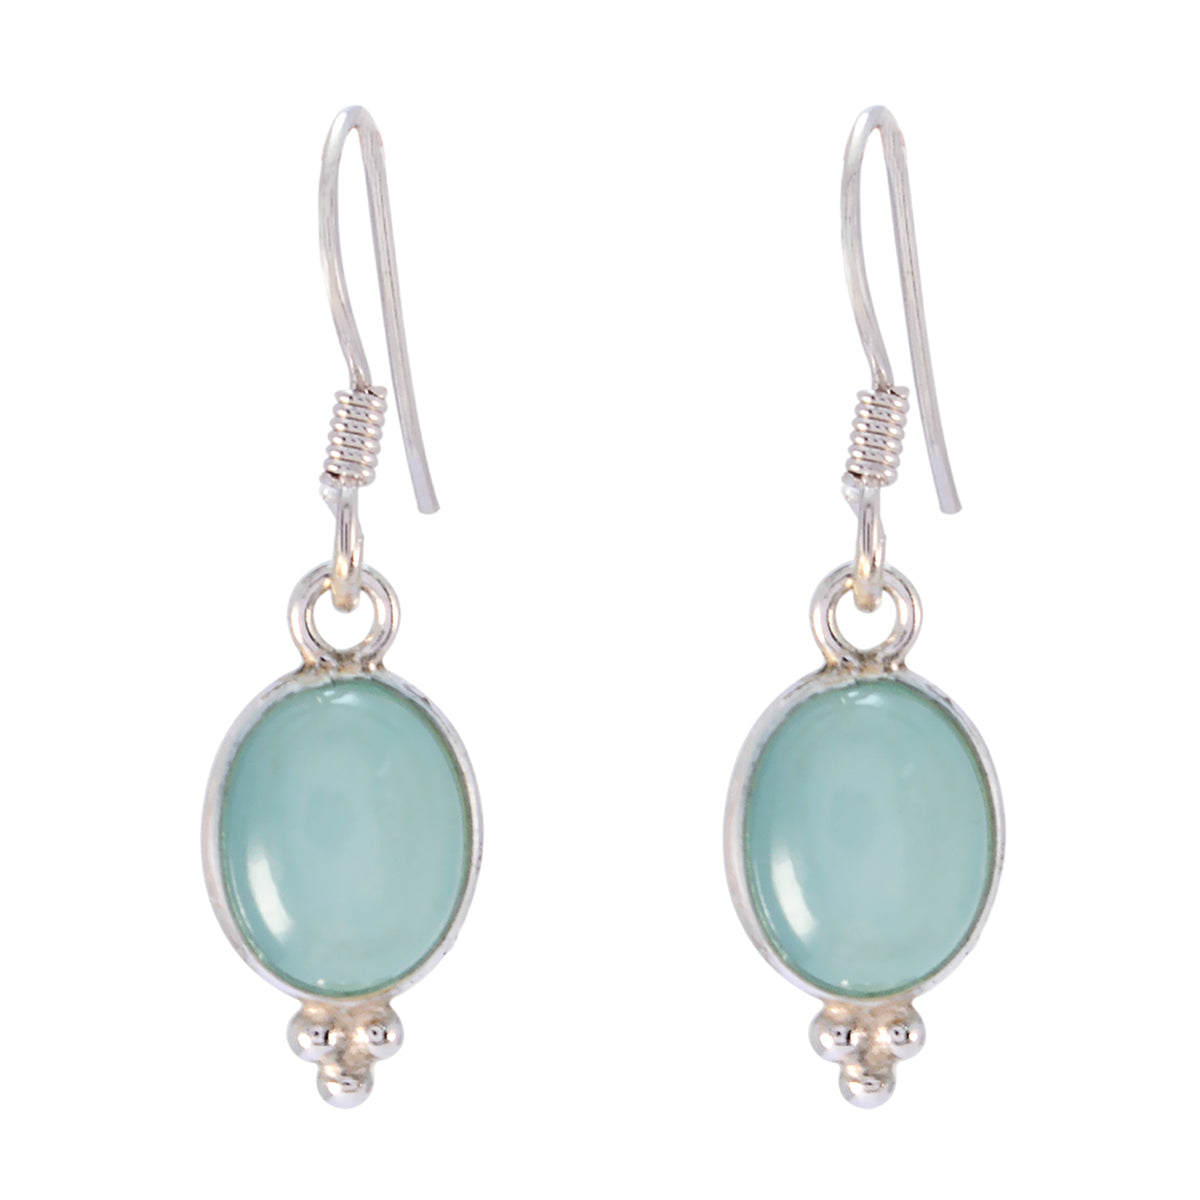 Riyo Genuine Gems round Cabochon Blue Chalcedony Silver Earring gift for mother